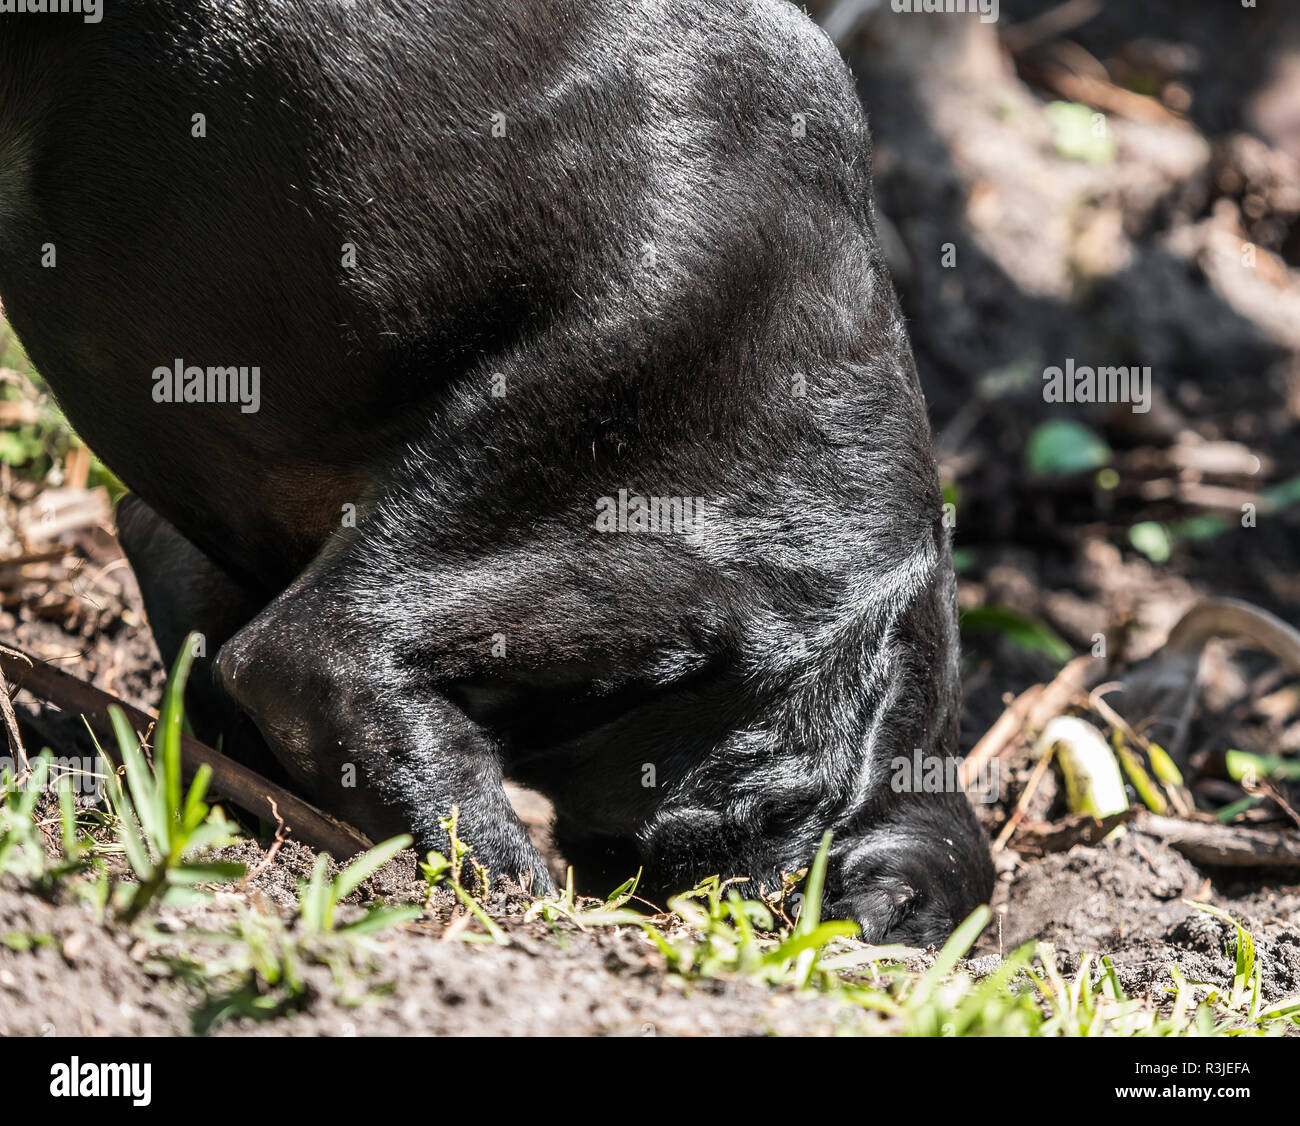 Large black dog digging a hole in dirt with his head halfway in it. Stock Photo